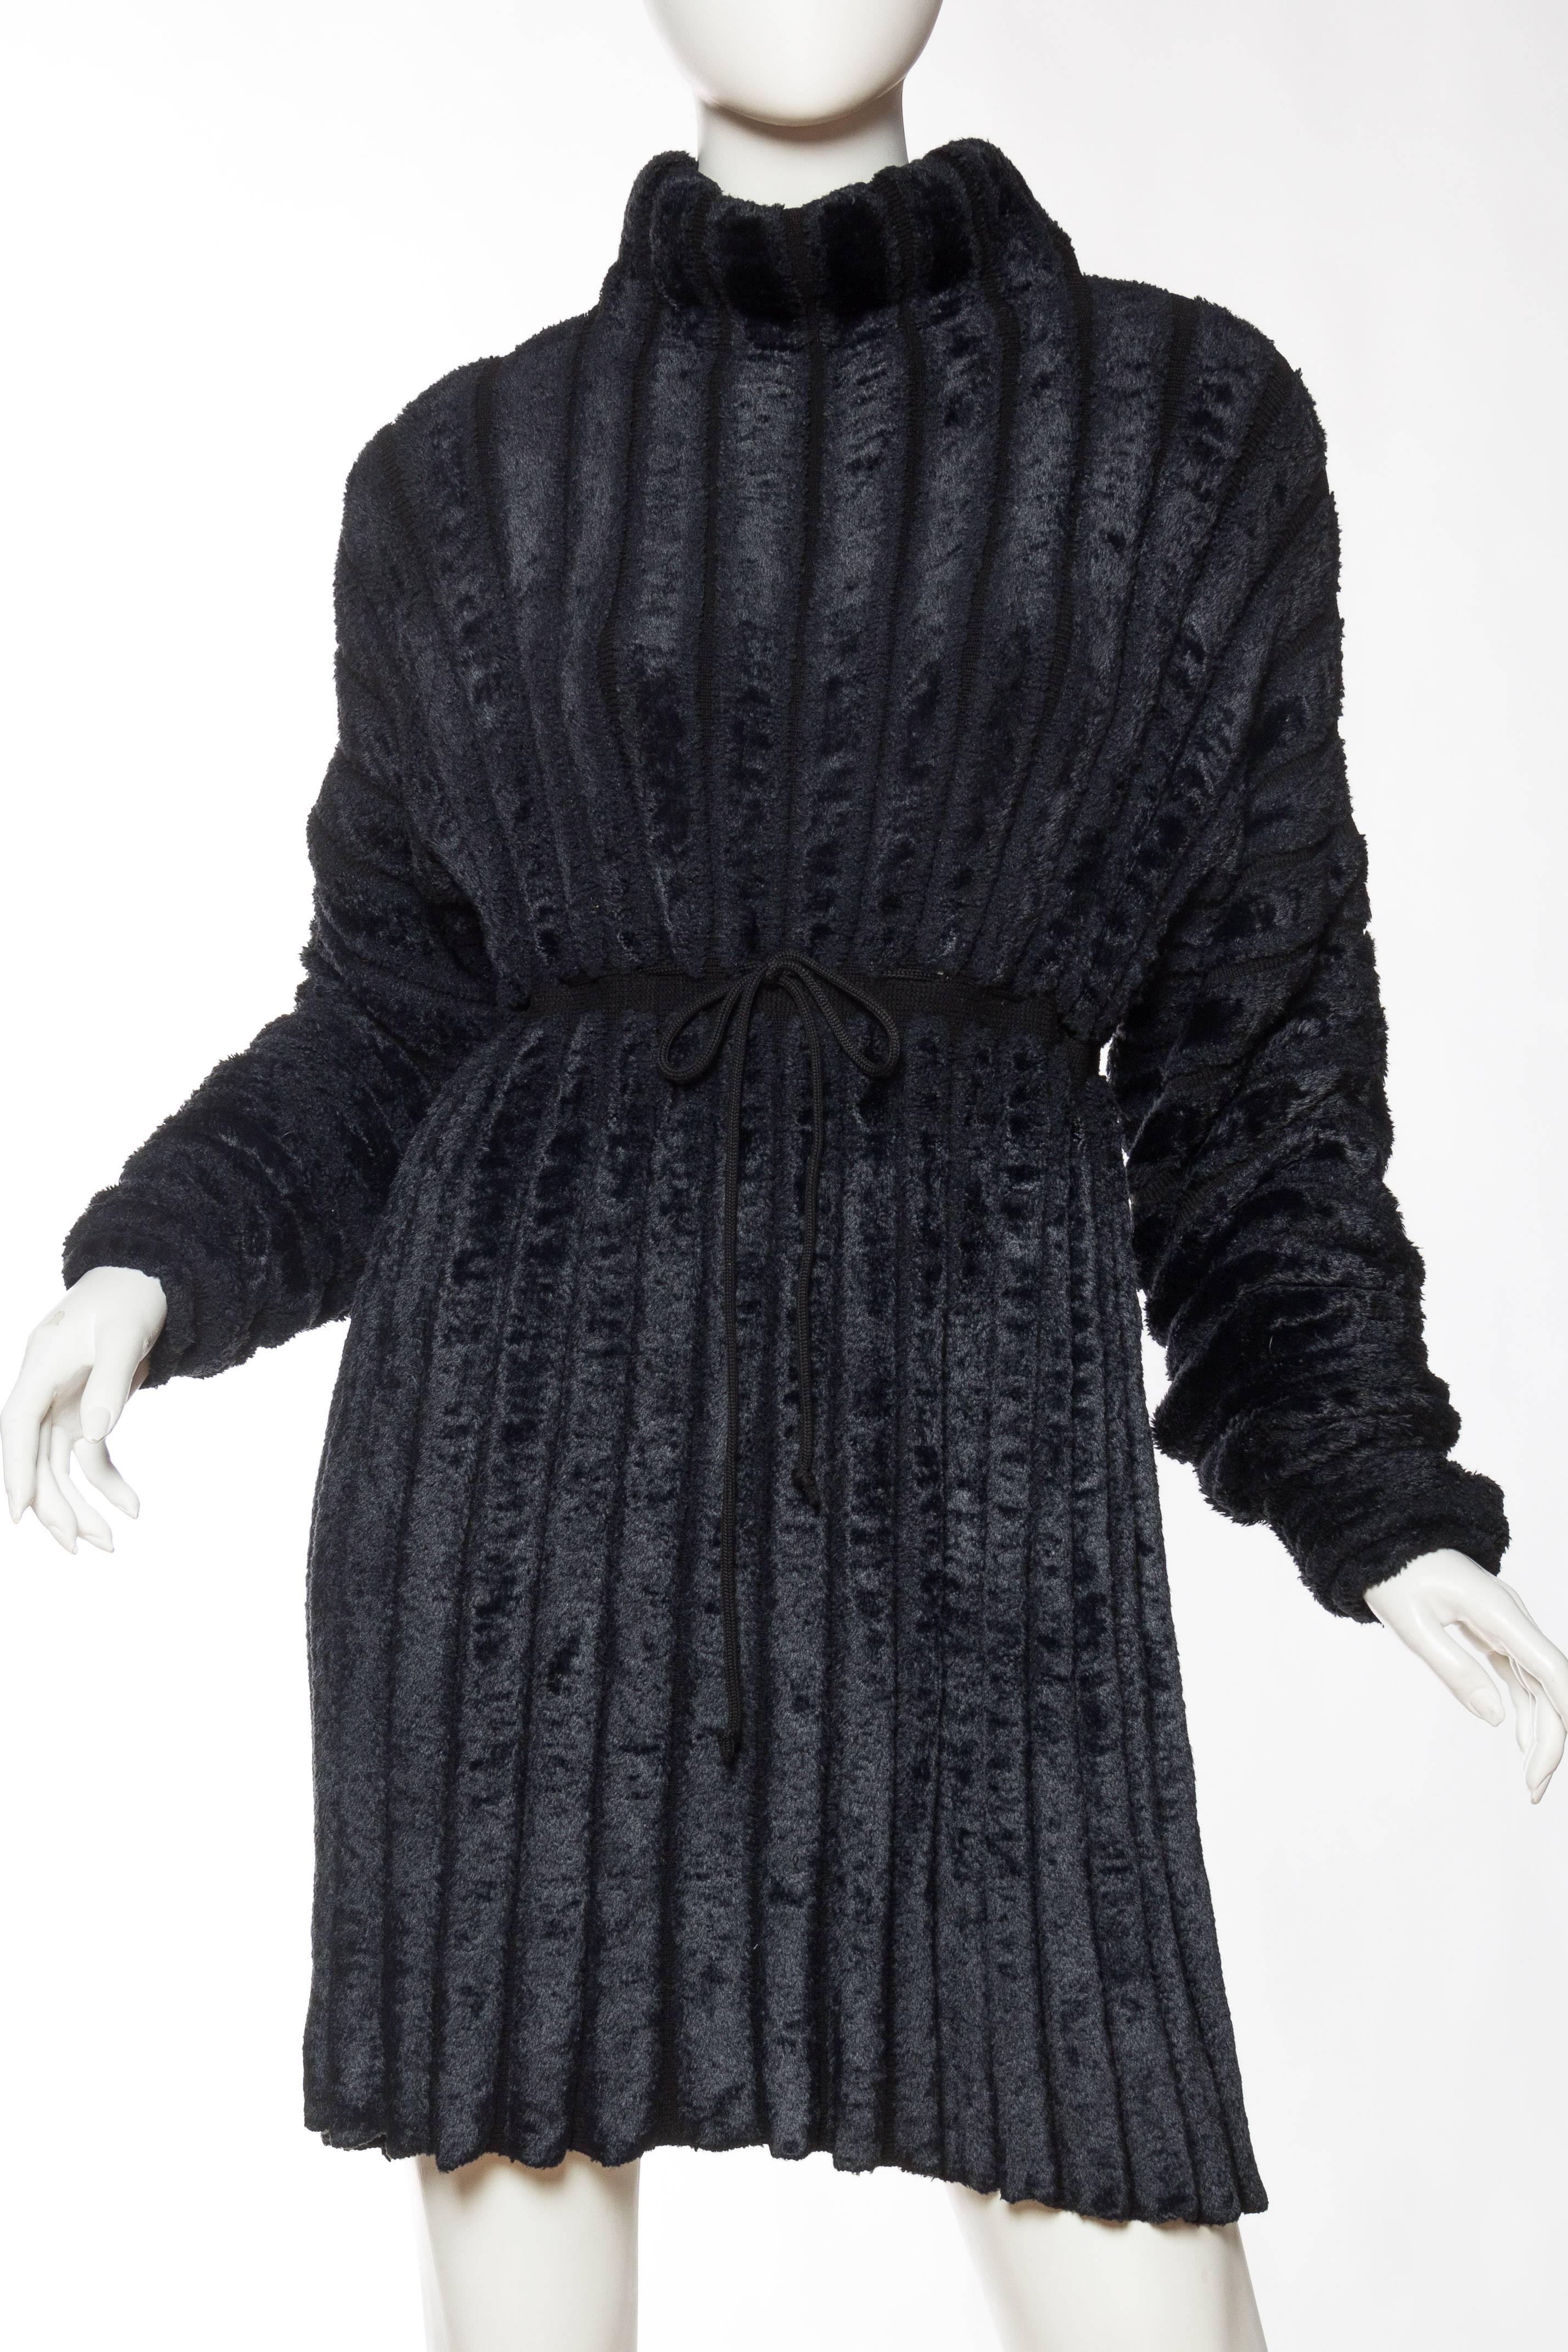 Black Alaia Iconic Oversized Chenille Dress, Fall 1988 Collection